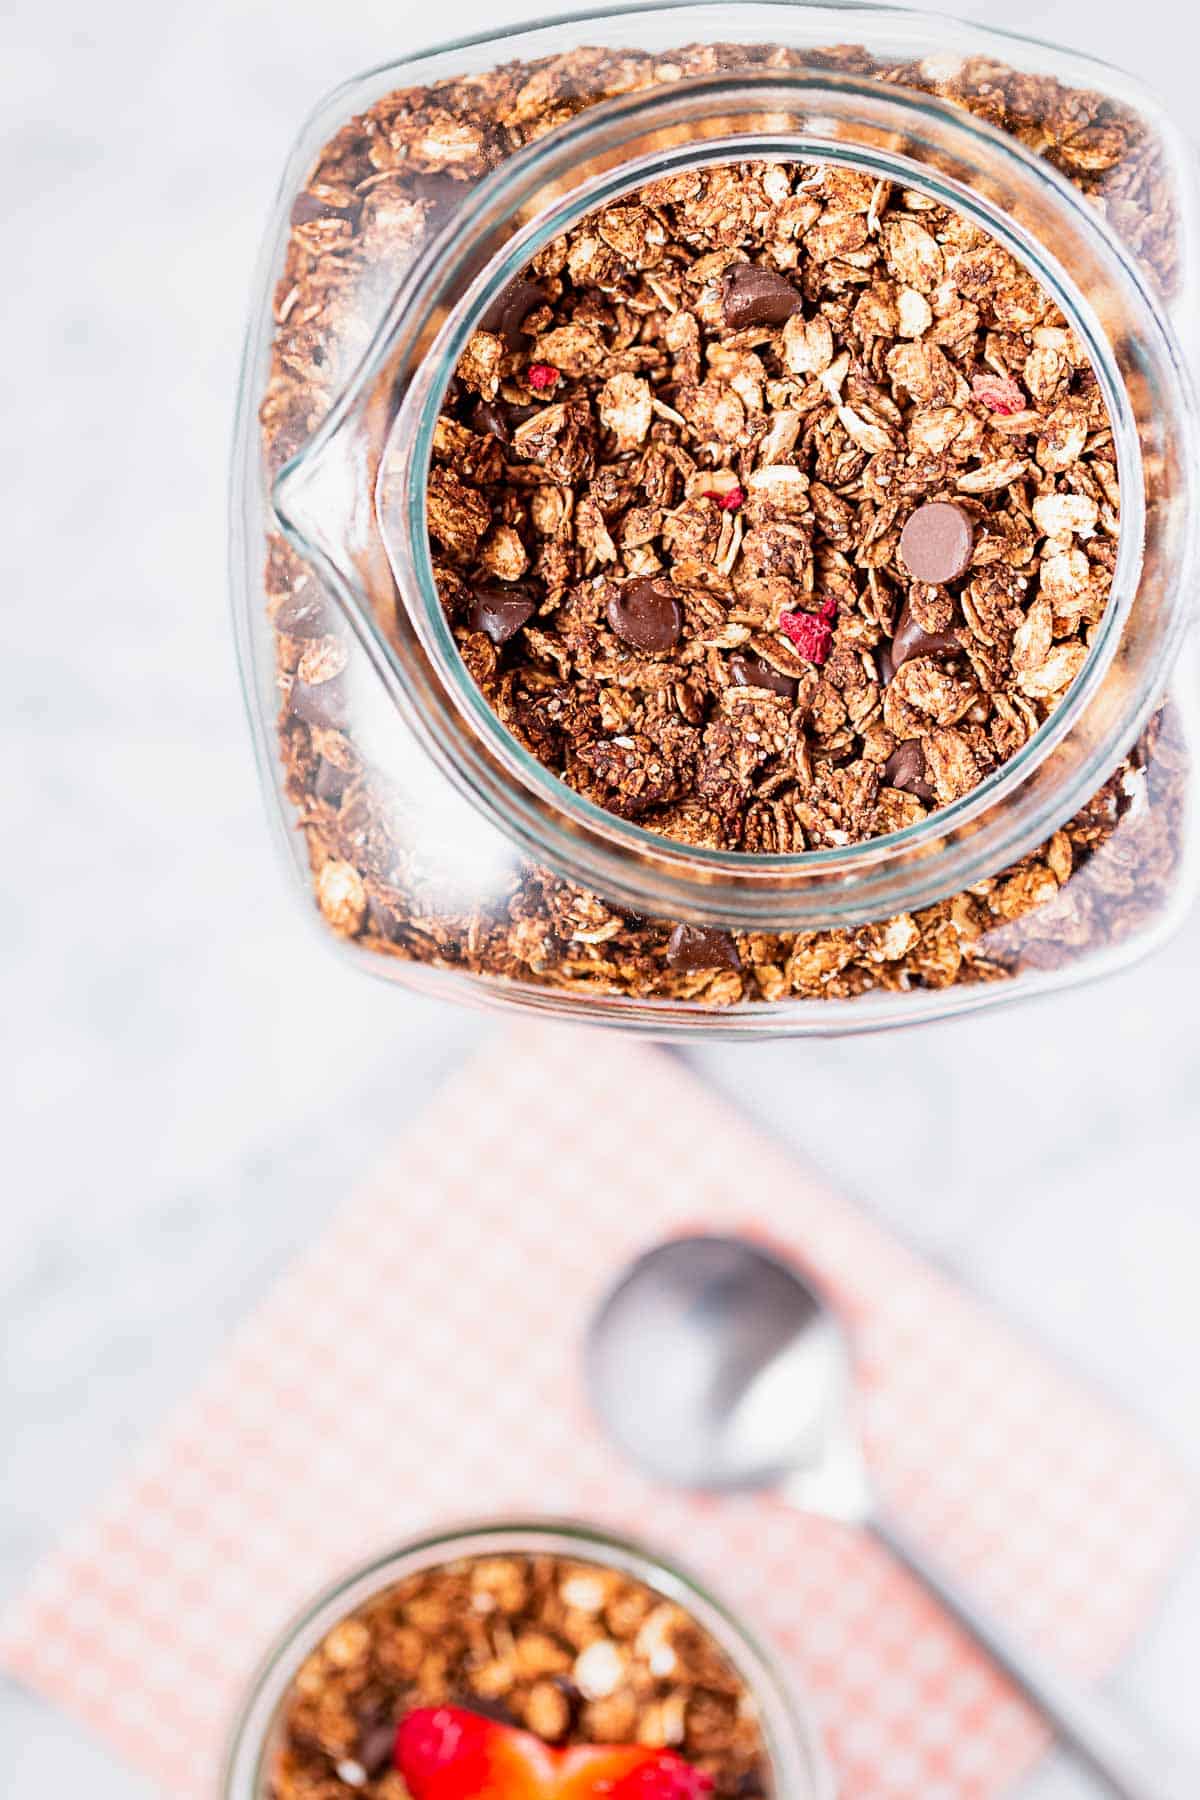 A large jar of homemade chocolate berry granola next to a parfait.